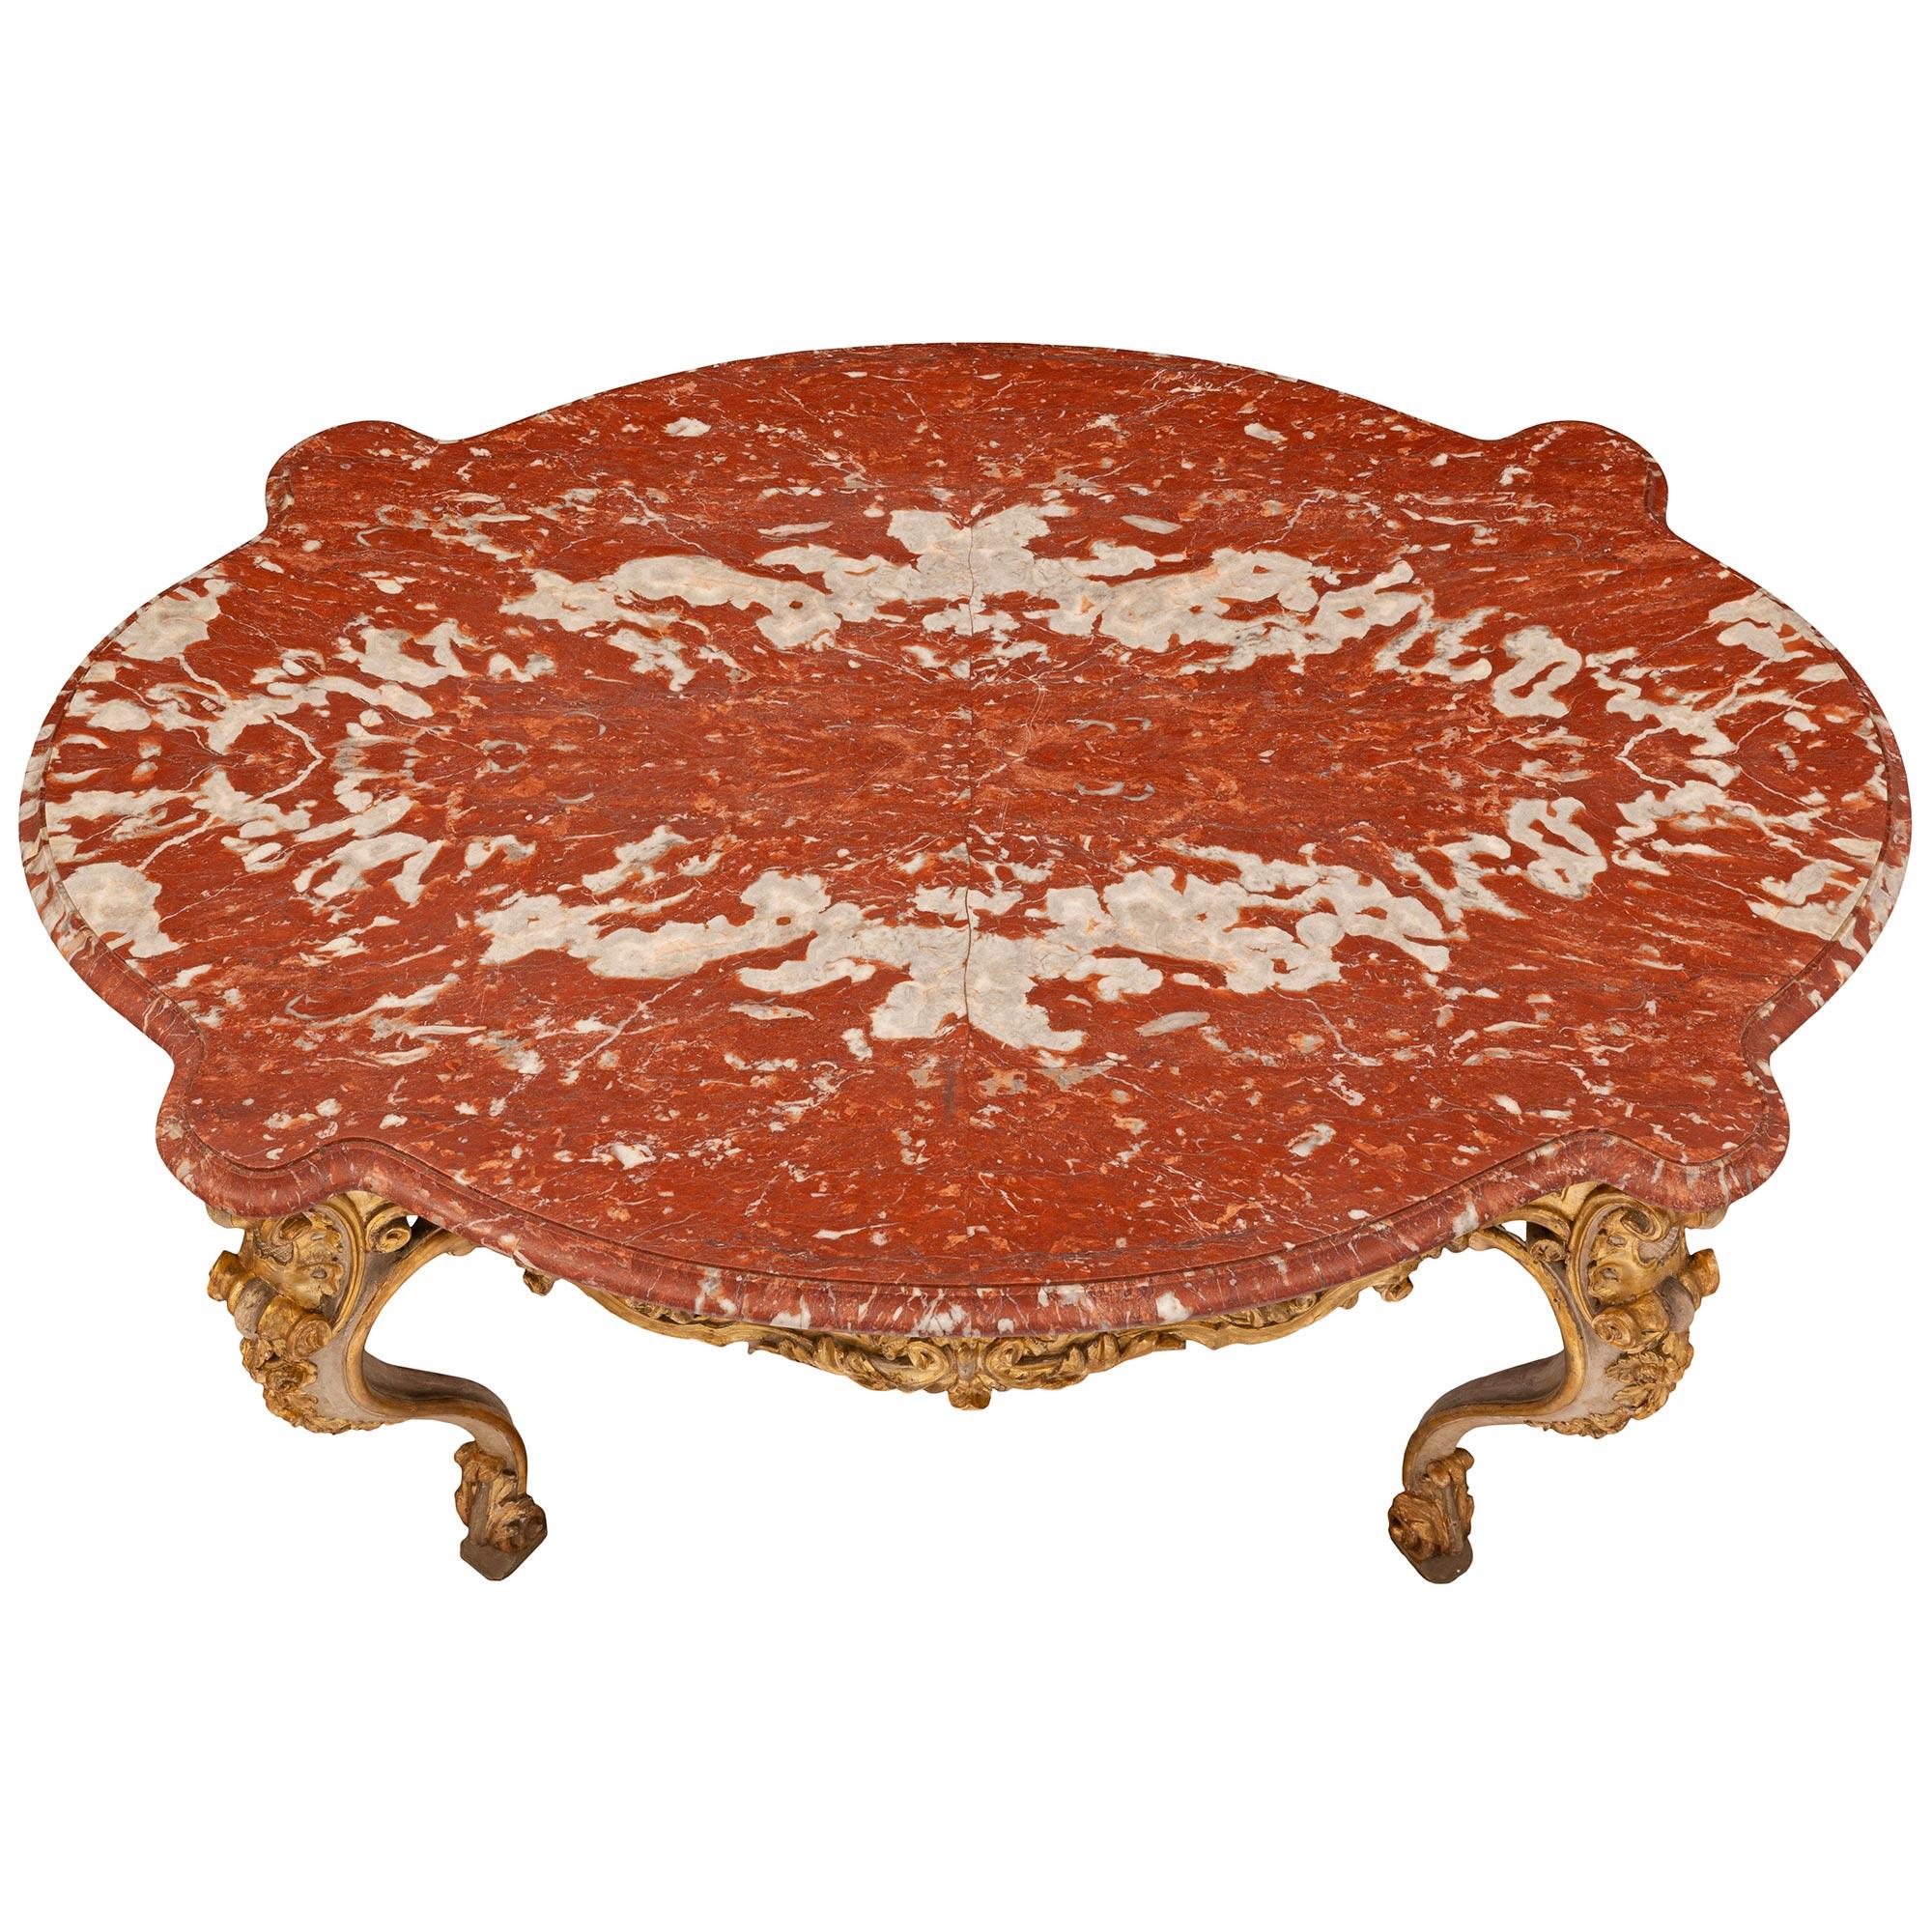 A superb Italian early 19th century Louis XV st. mecca, patinated, and veneered marble top center table. Raised on patinated off white cabriole legs with scrolled mecca trim and ornate with an acanthus leaf at the bottom. At the top of the leg, a